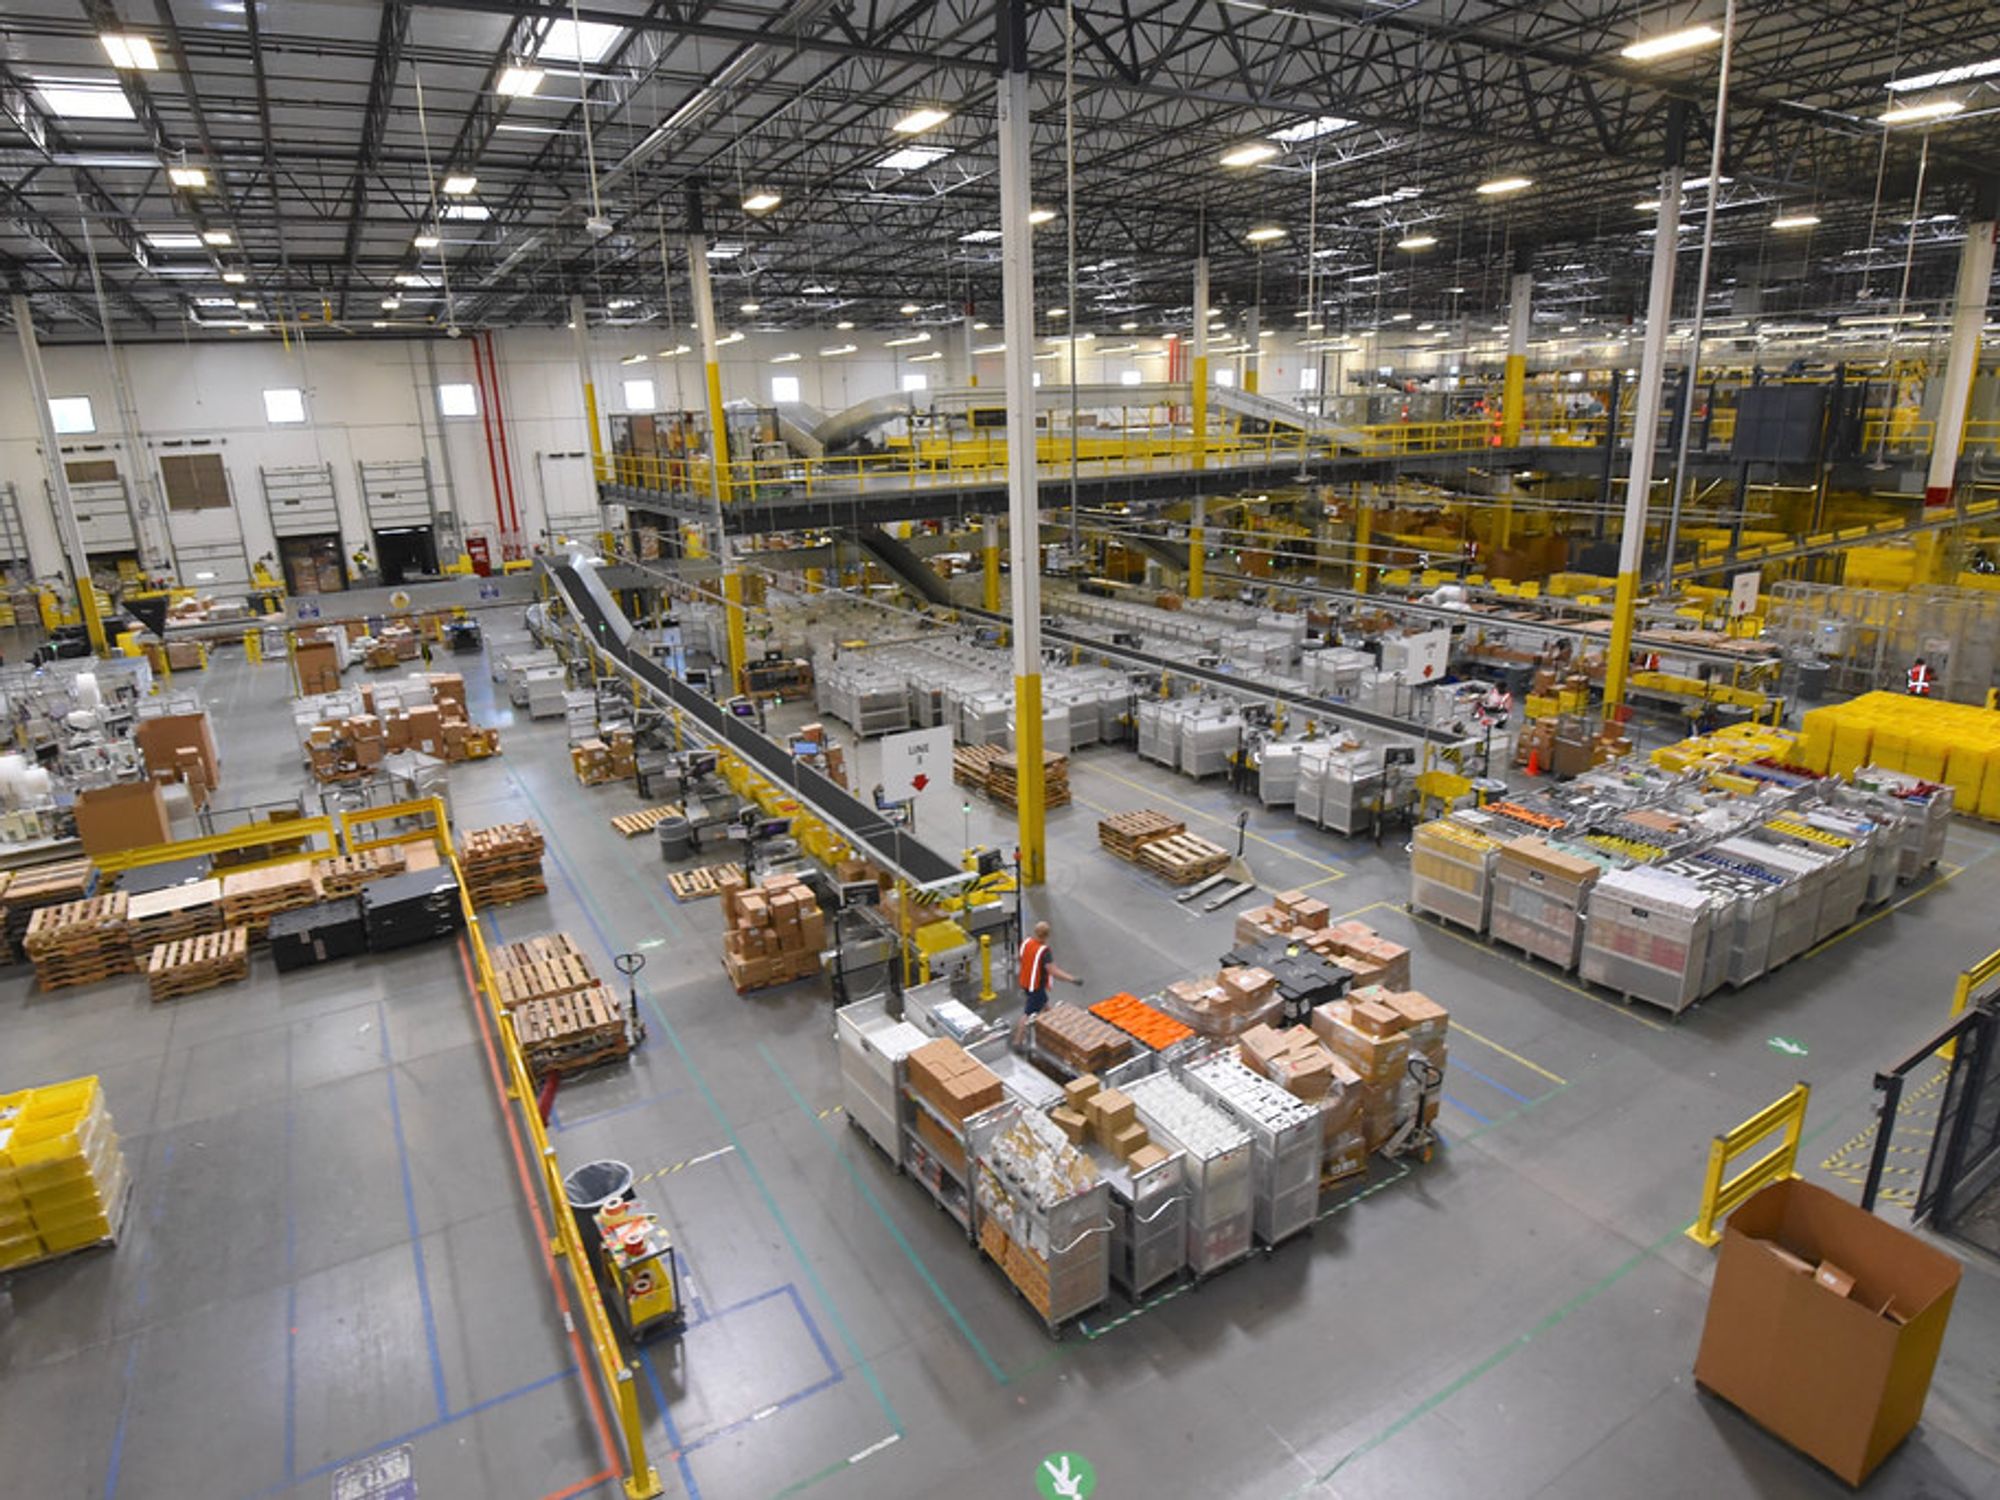 Amazon Warehouse Worker in L.A. Tests Positive, As Company Struggles with Covid-19